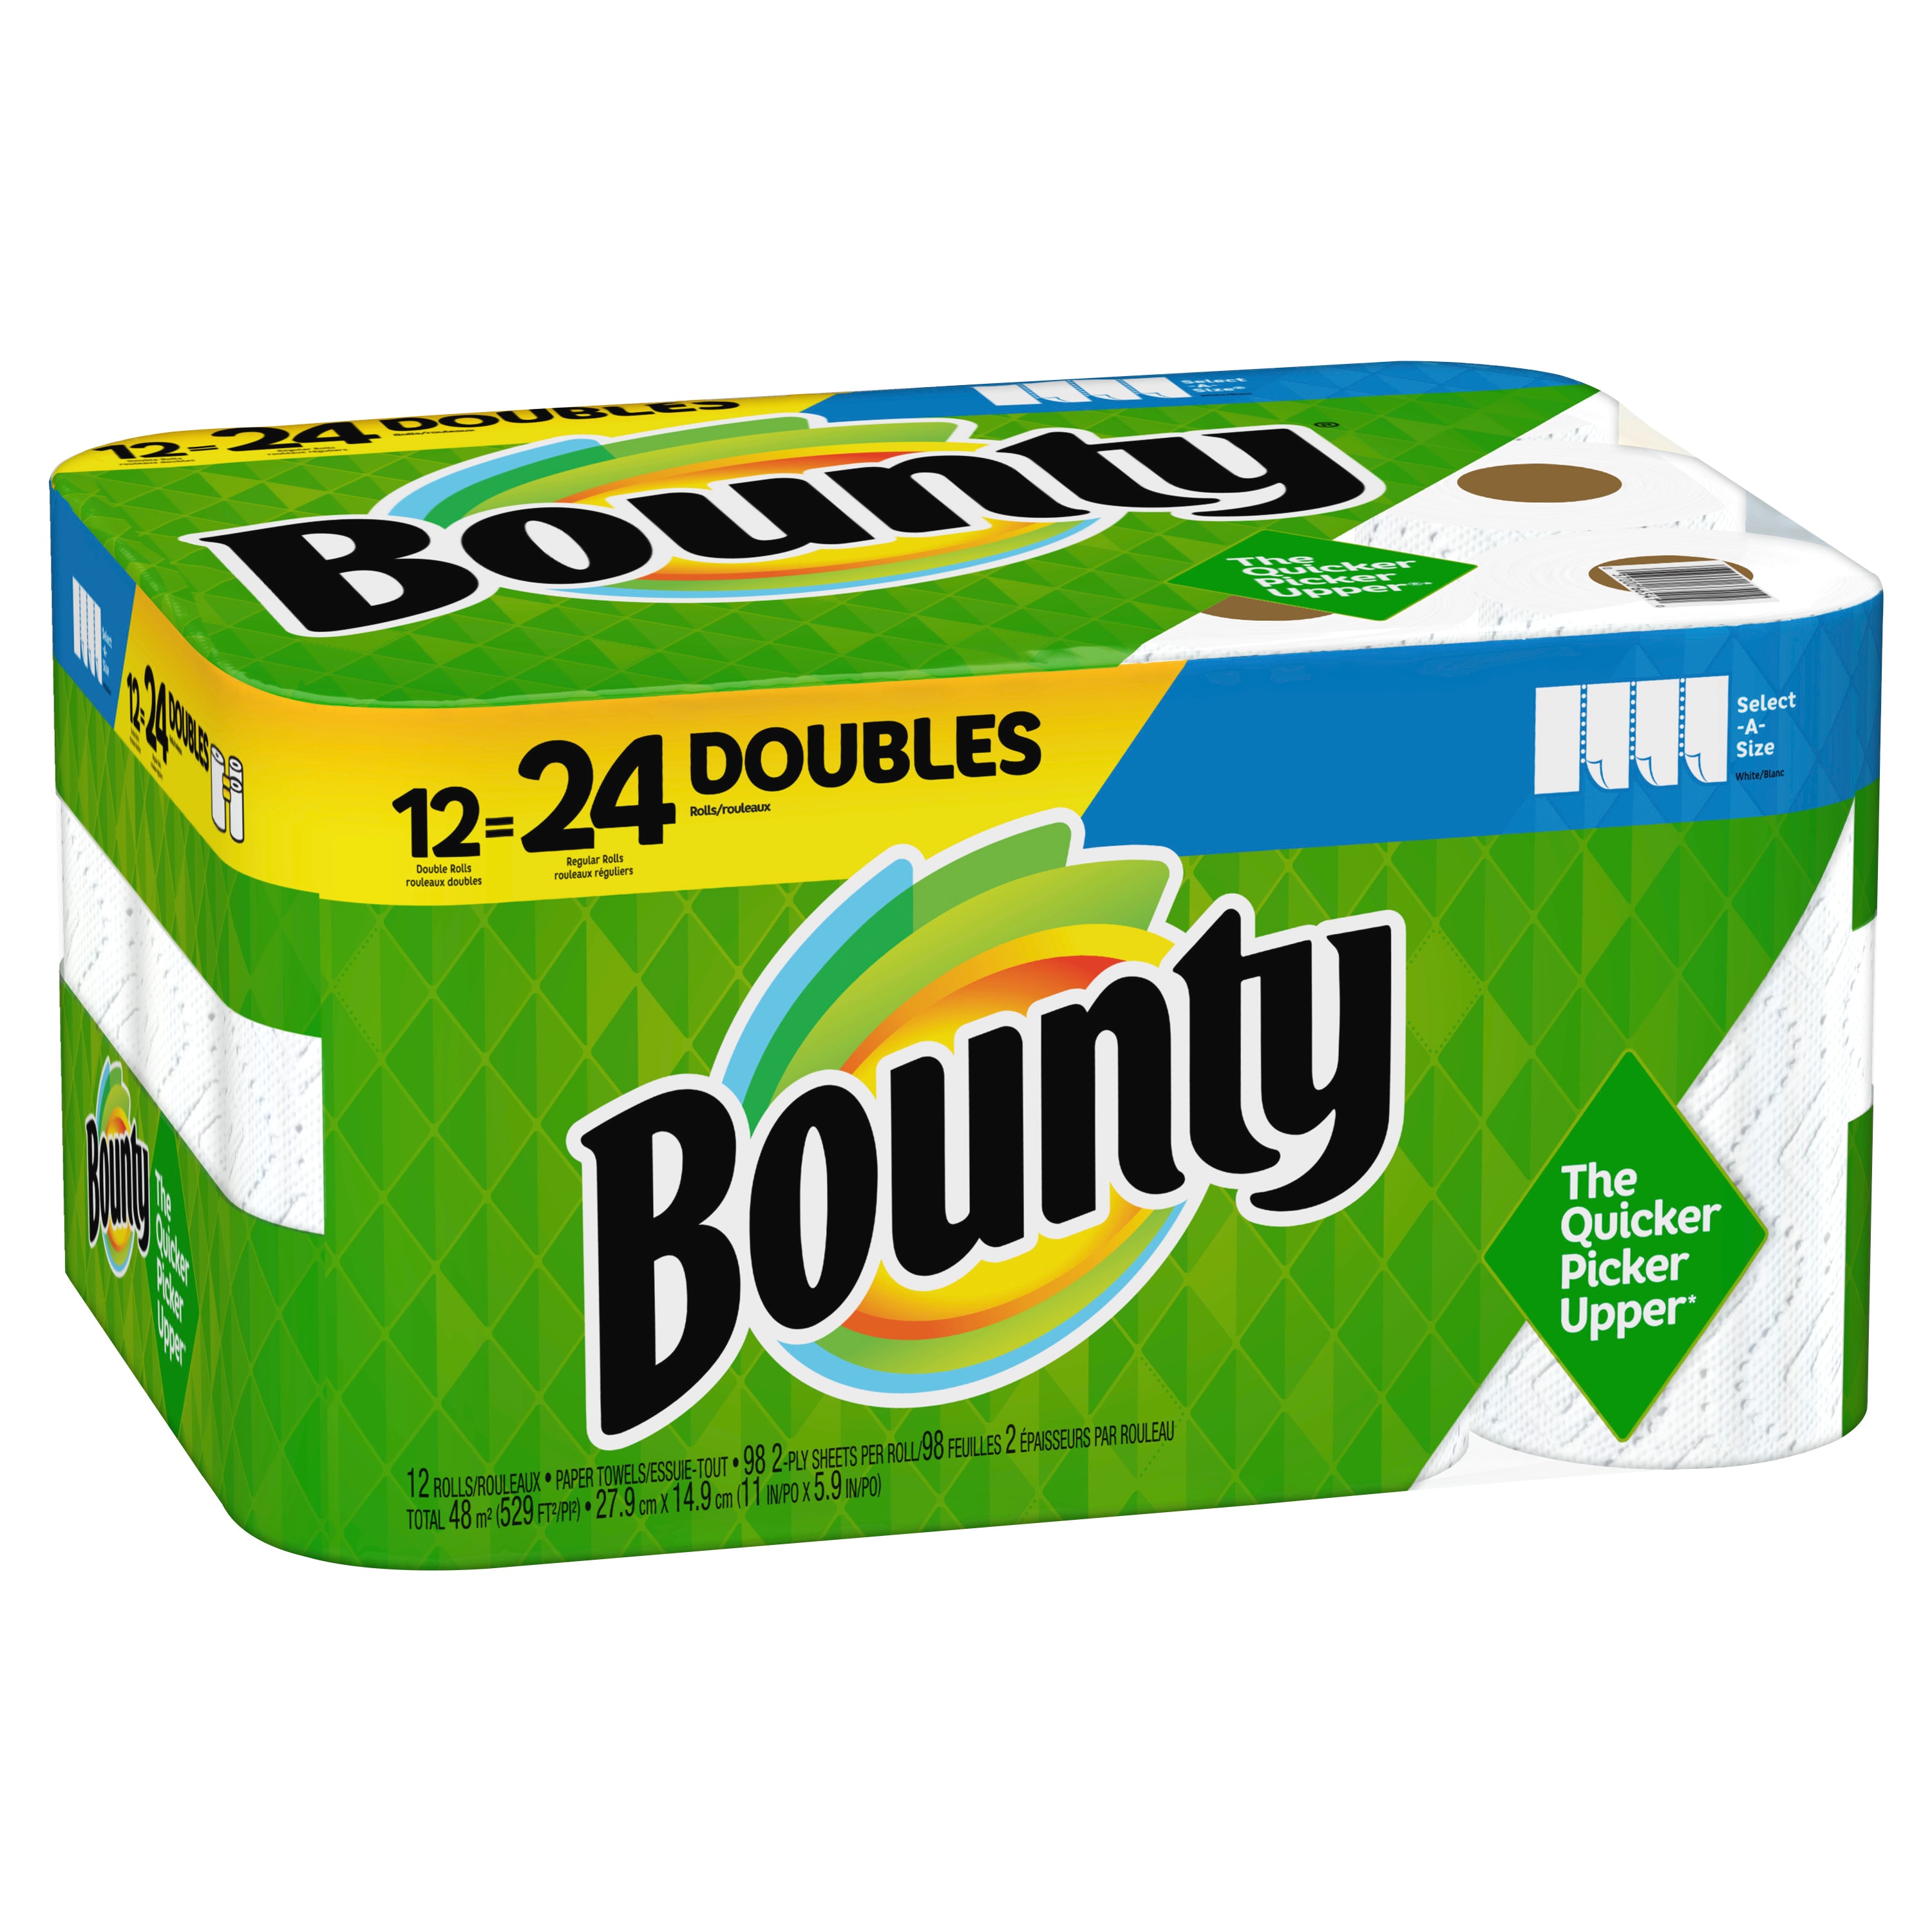 Bounty White, Select-A-Size Paper Towels (12 Double Plus Rolls) (Multi-Pack of 2)